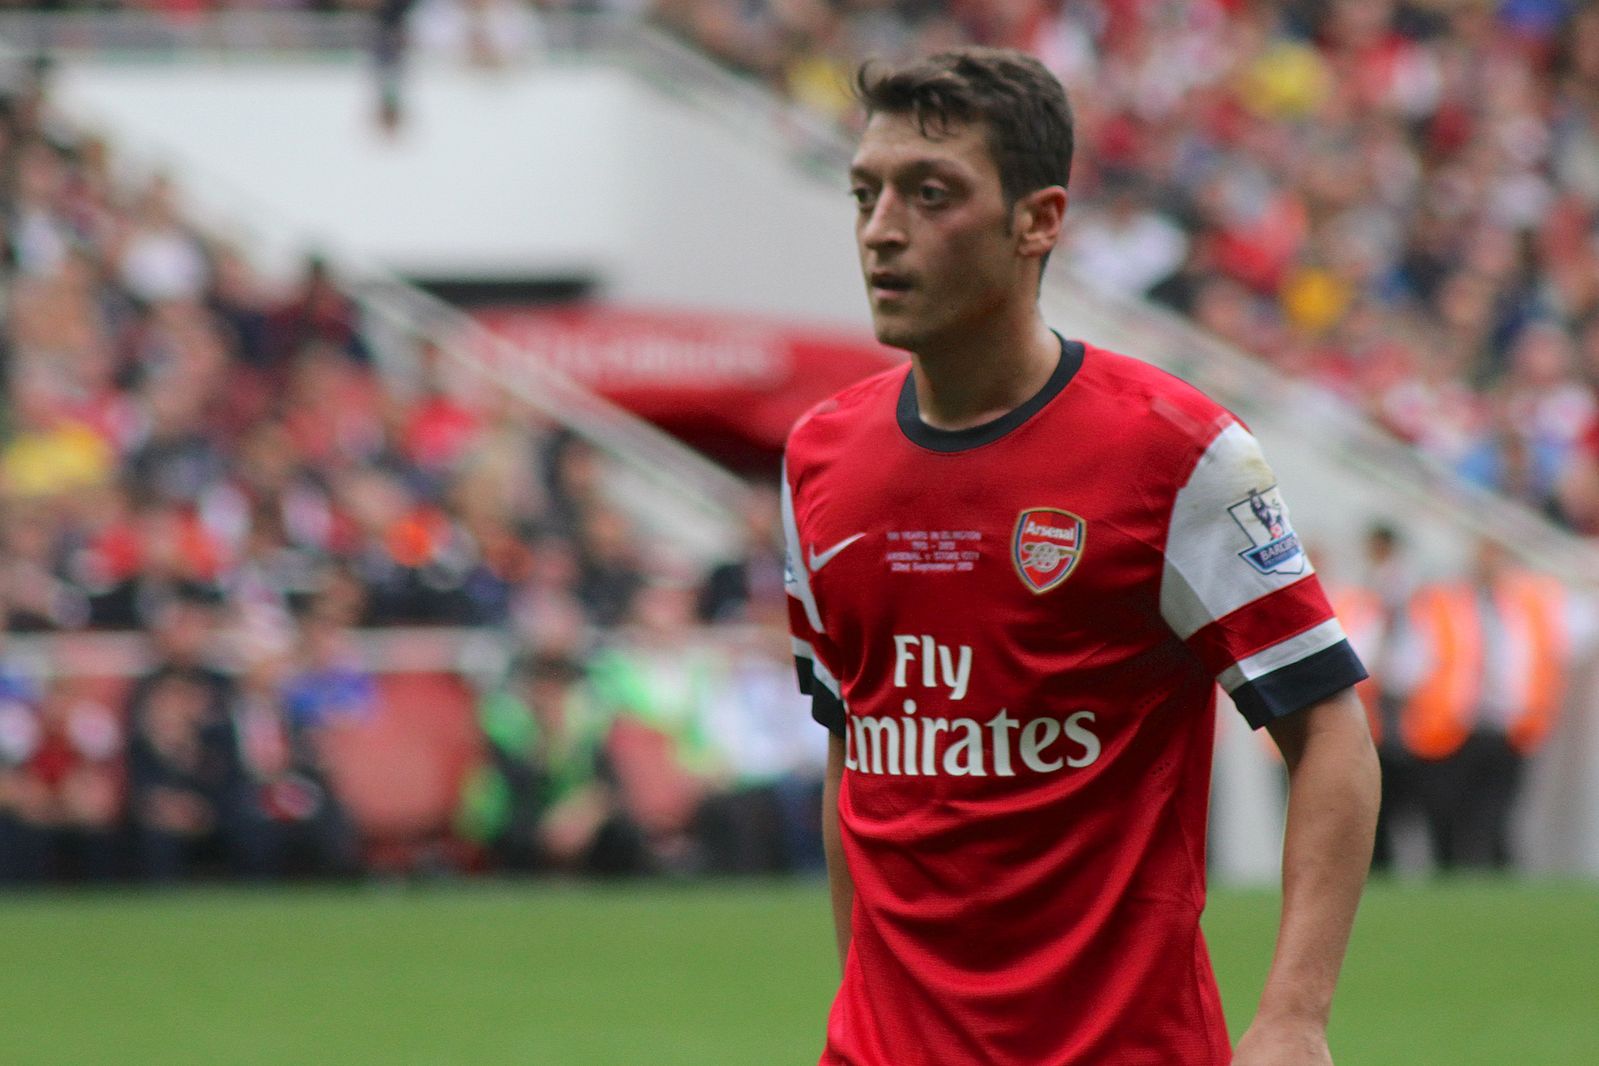 Image for Arsenal's Mesut Özil removed from PES 2020 after criticising China's treatment of Muslims